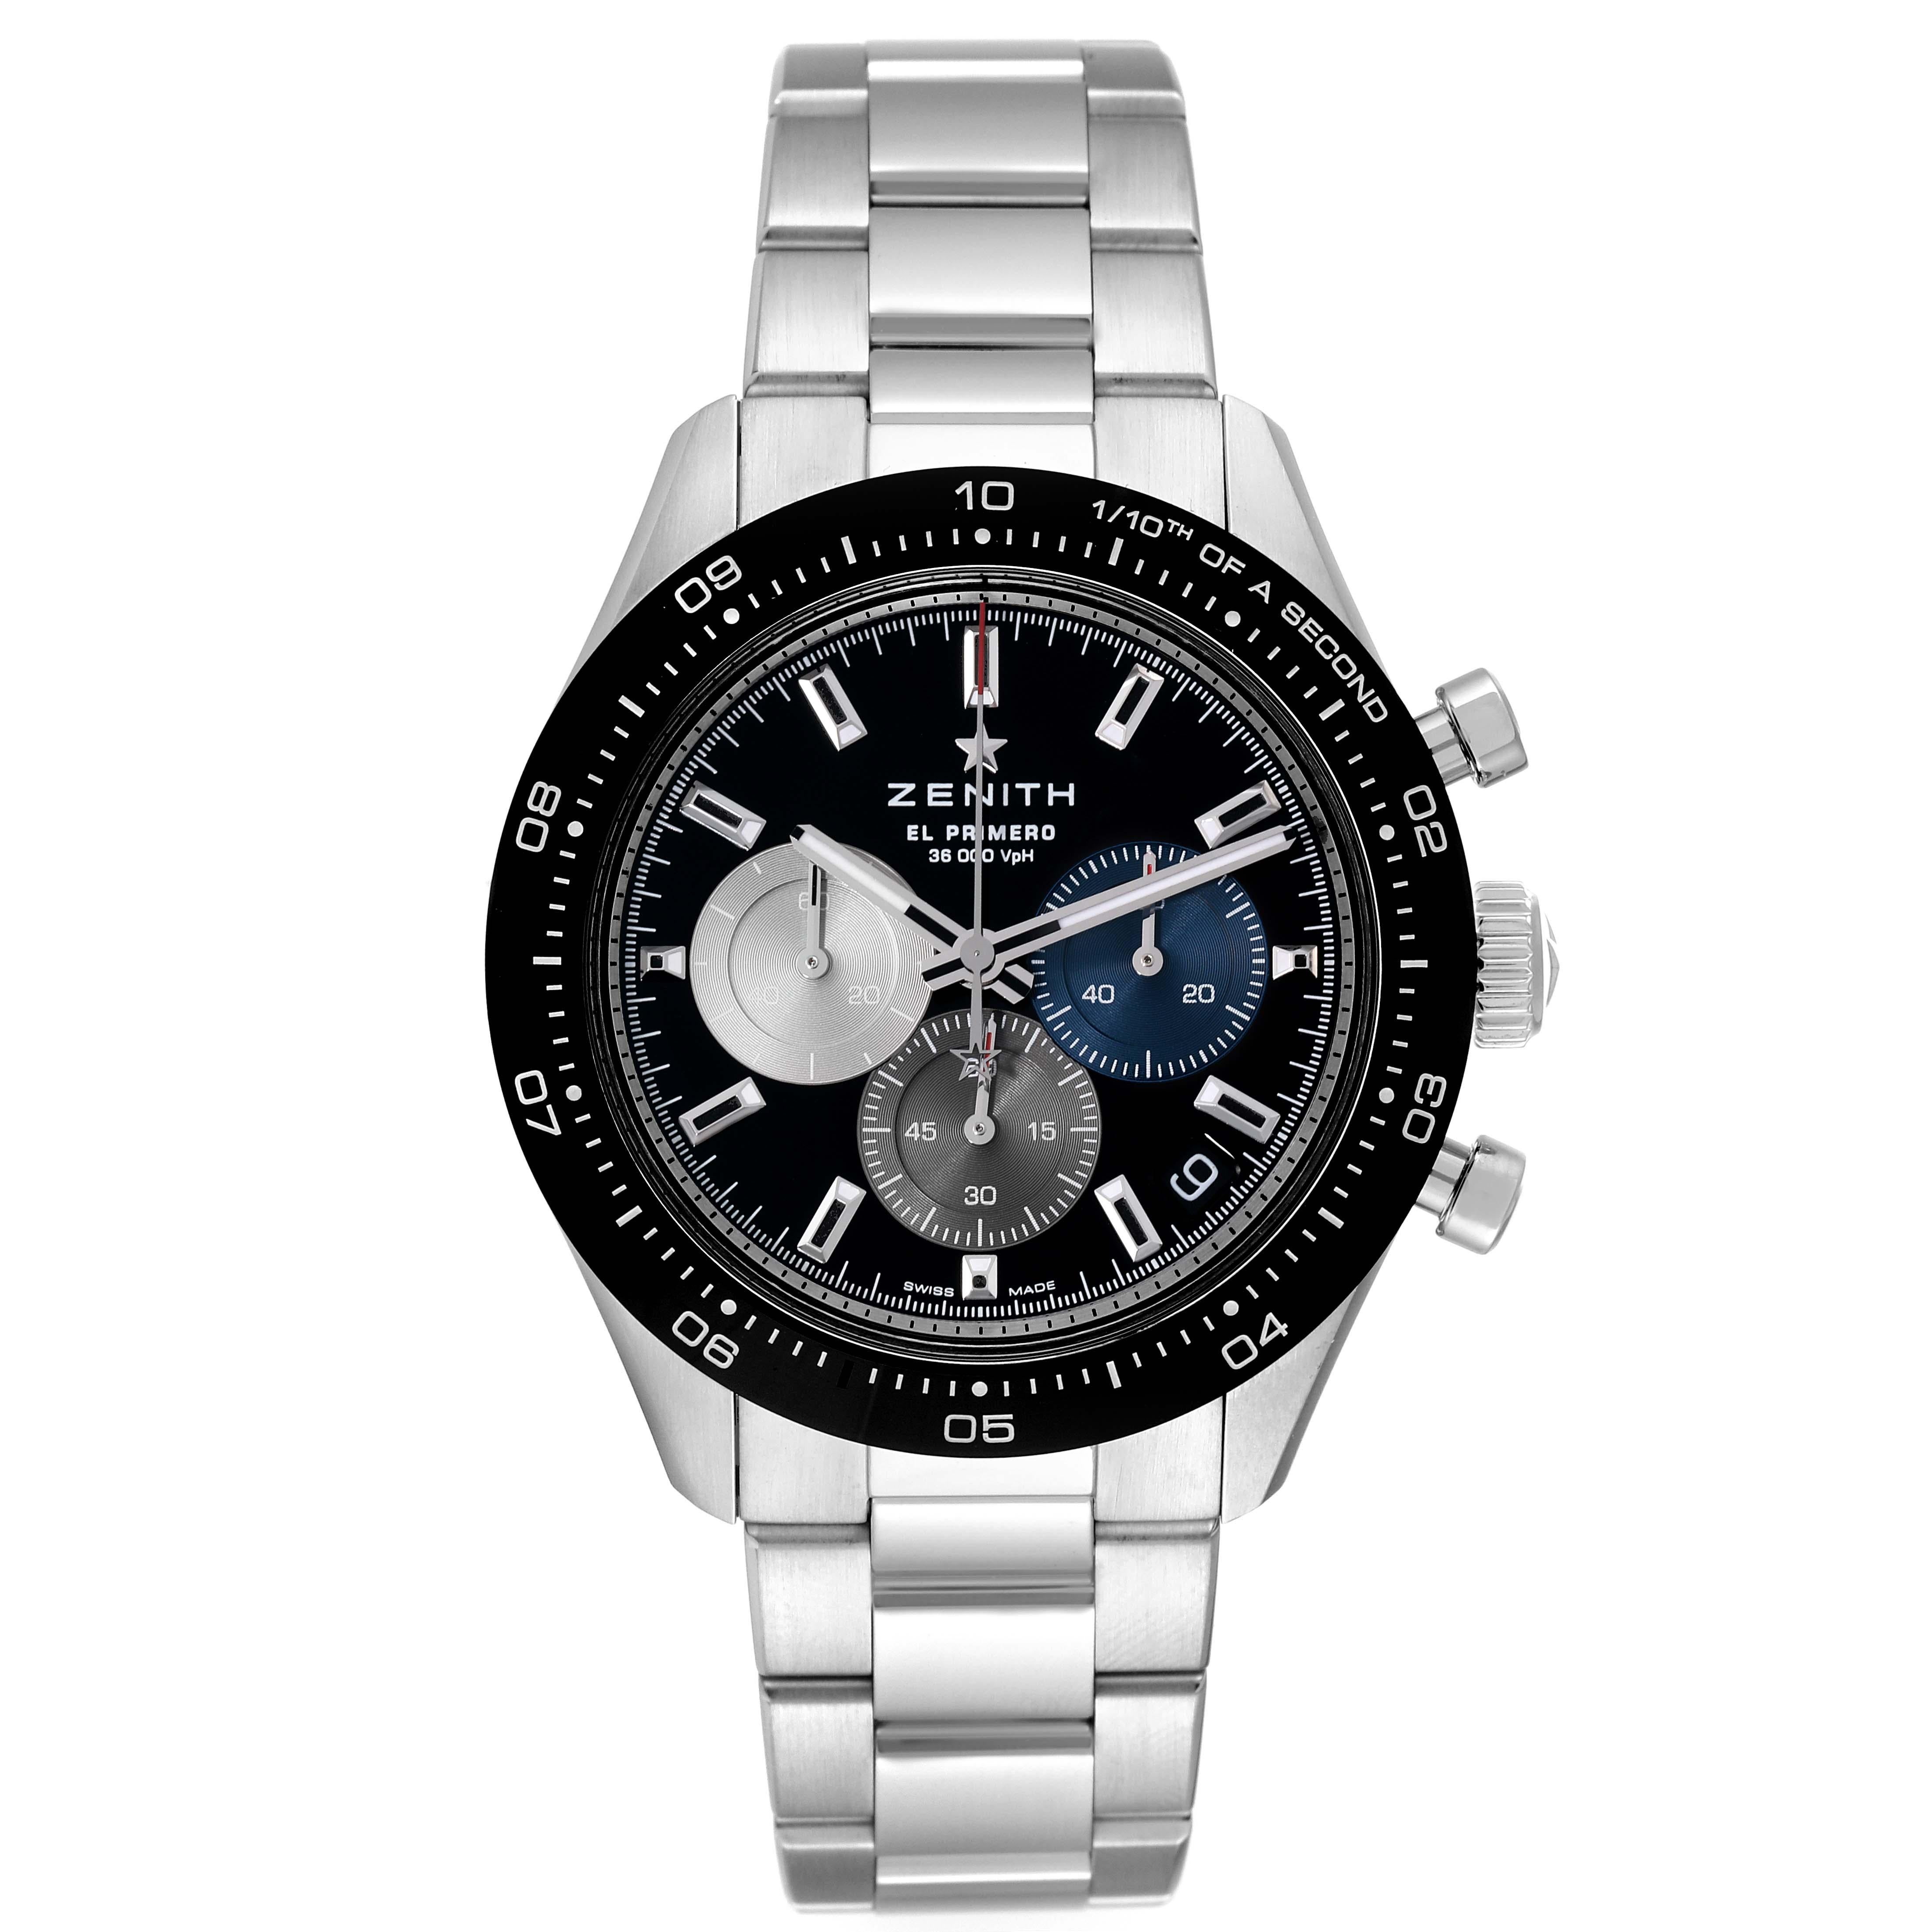 Zenith Chronomaster Sport 41mm Steel Mens Watch 03.3100.3600 Box Card. Zenith El Primero self-winding movement . Stainless steel case 41.0 mm in diameter. Exhibition transparent sapphire crystal case back. Black ceramic bezel with 10 seconds scale